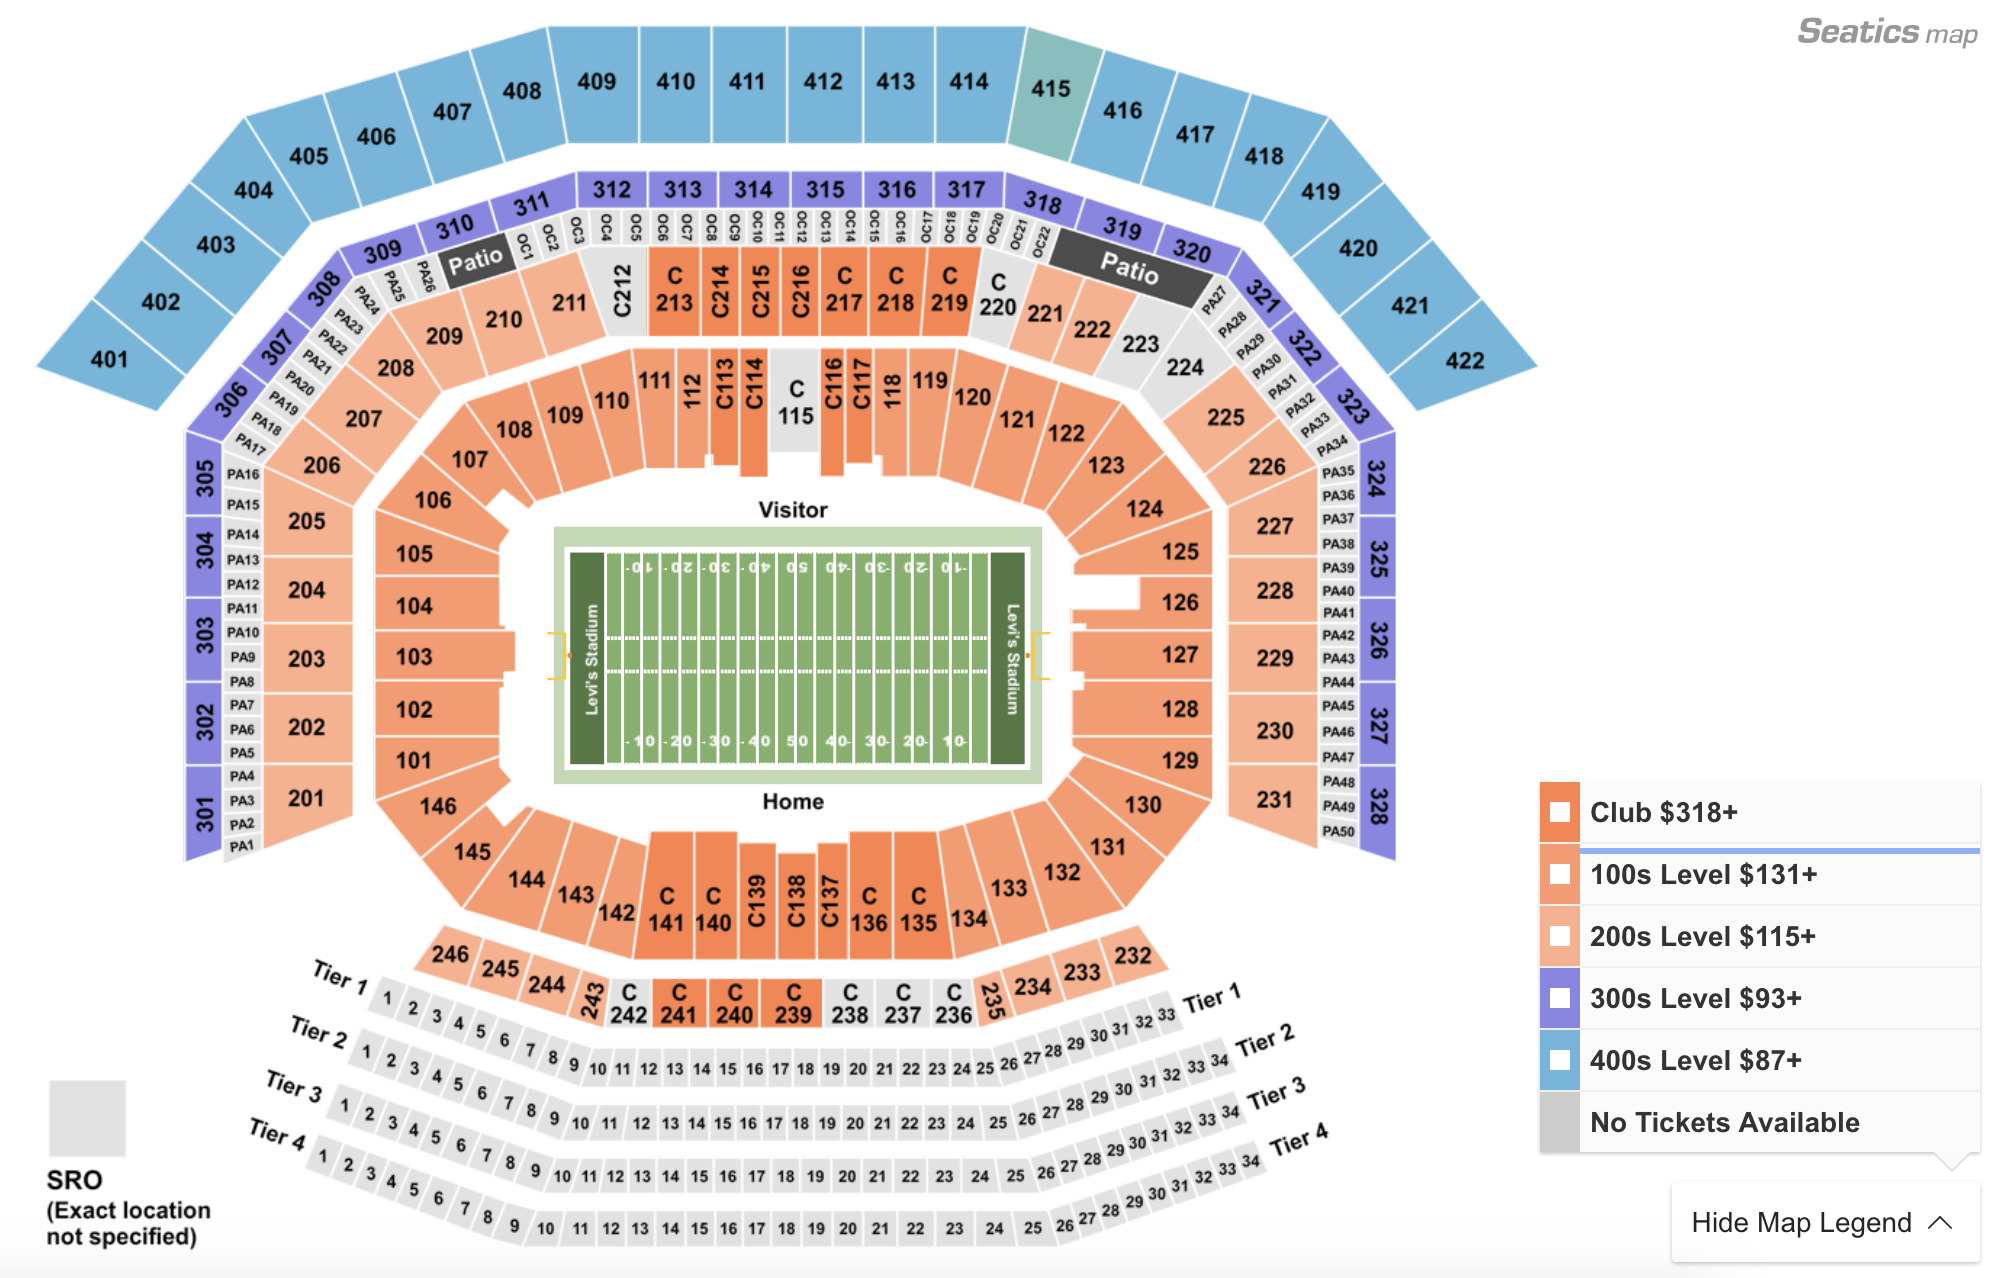 How To Find The Cheapest 49ers Vs. Rams Tickets In 2019